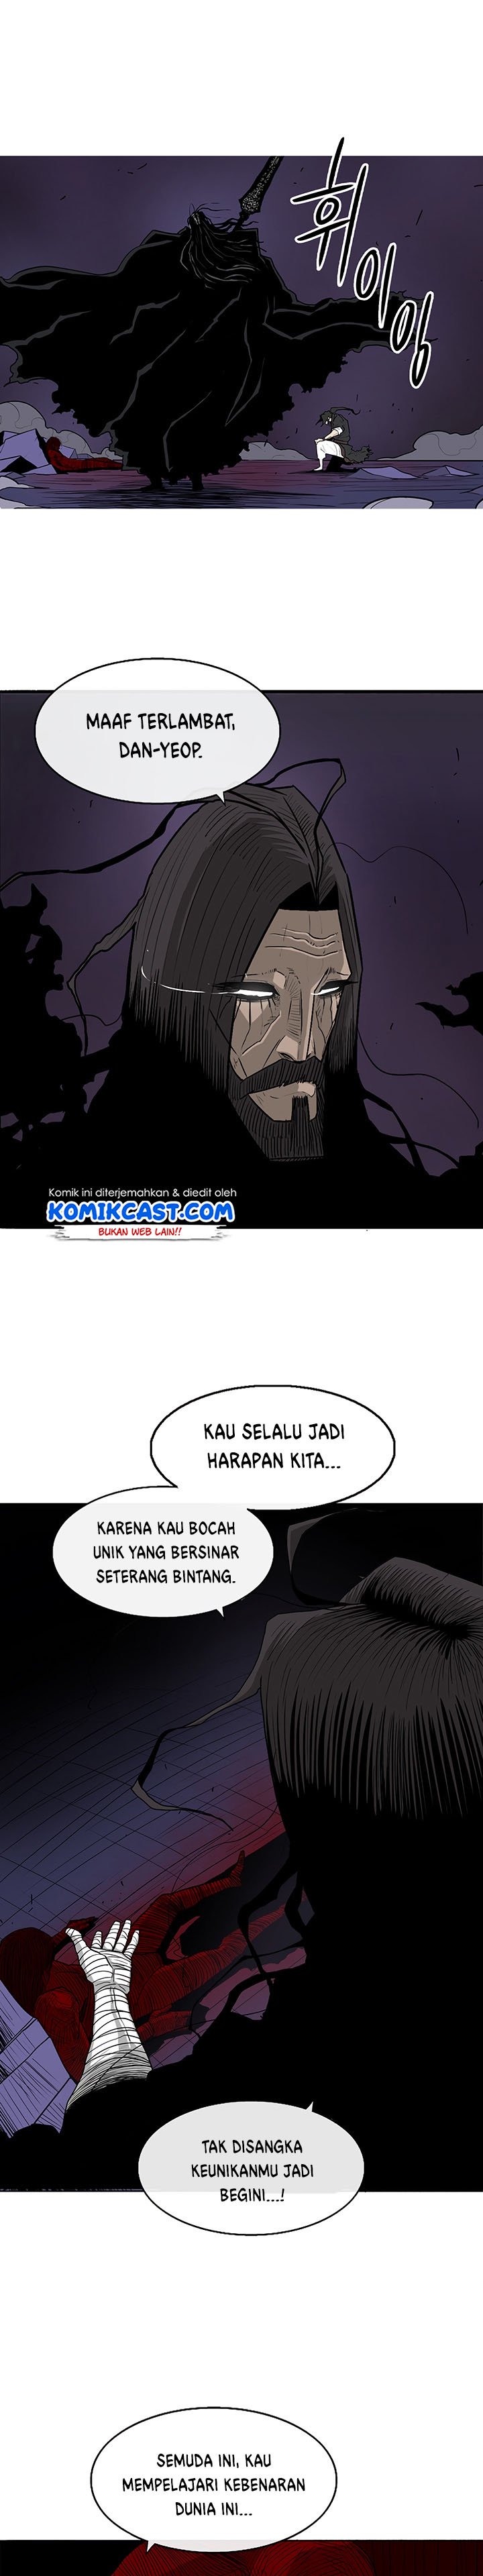 Legend of the Northern Blade Chapter 48